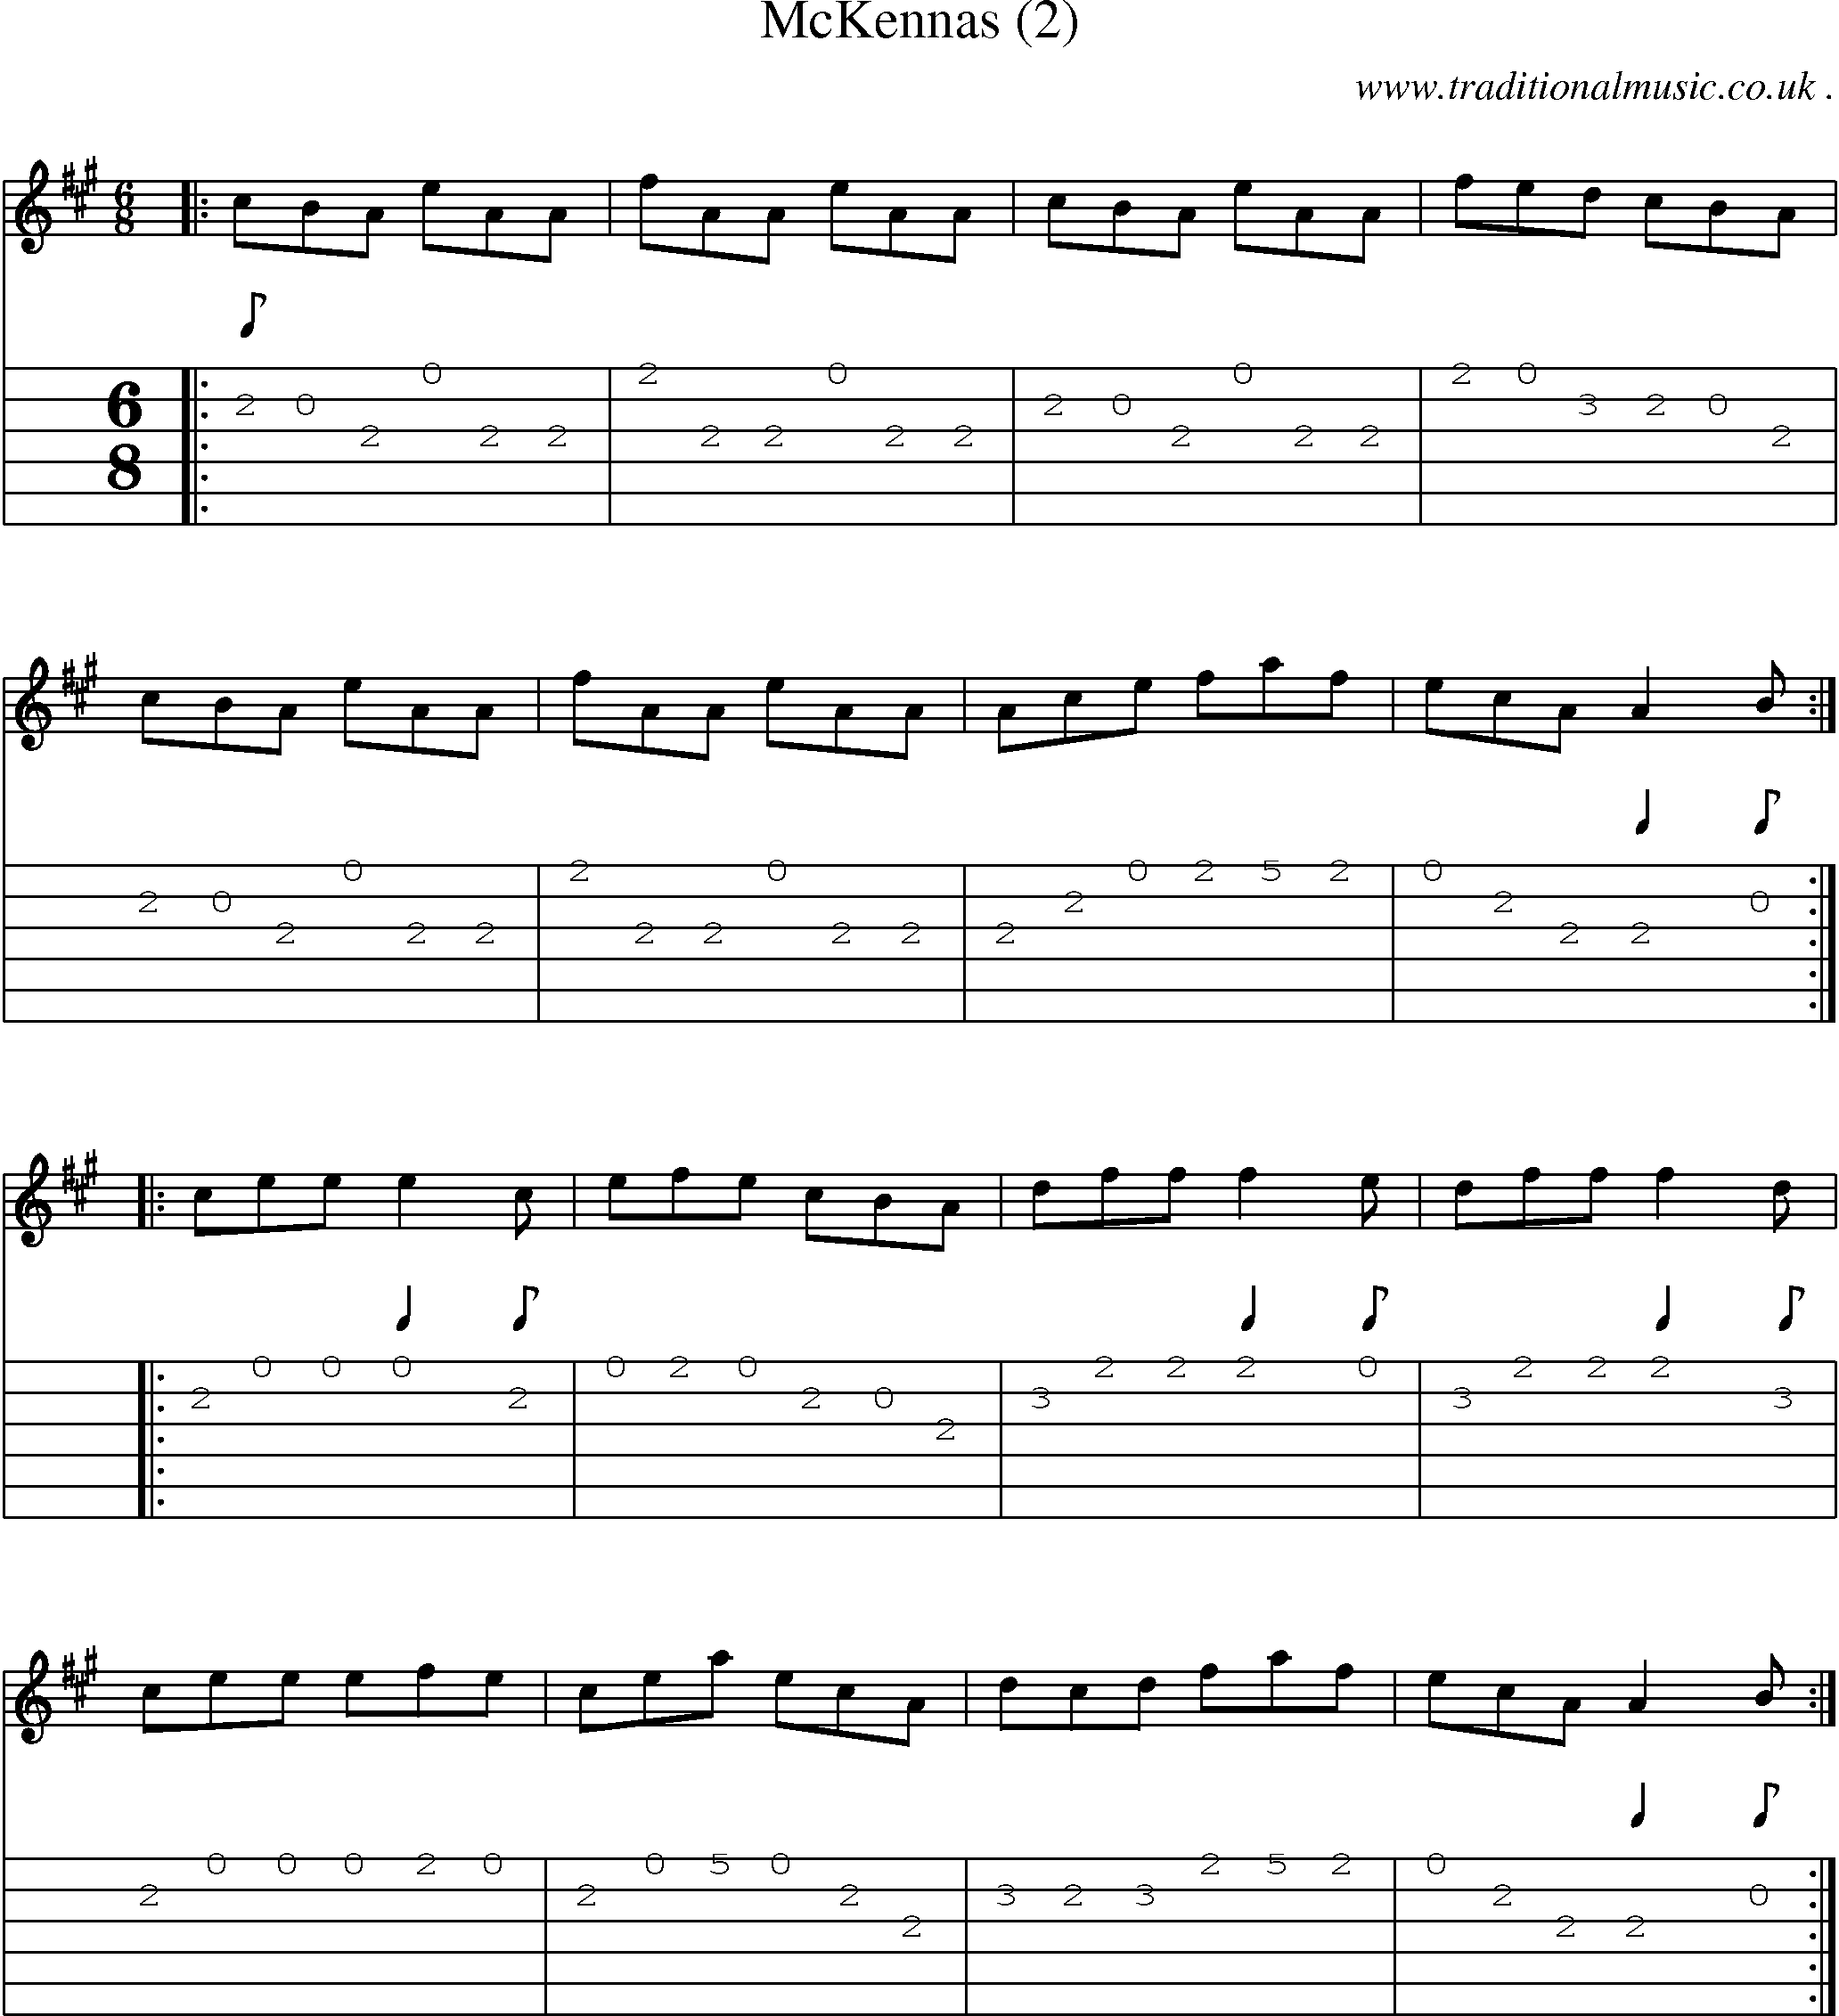 Sheet-Music and Guitar Tabs for Mckennas (2)